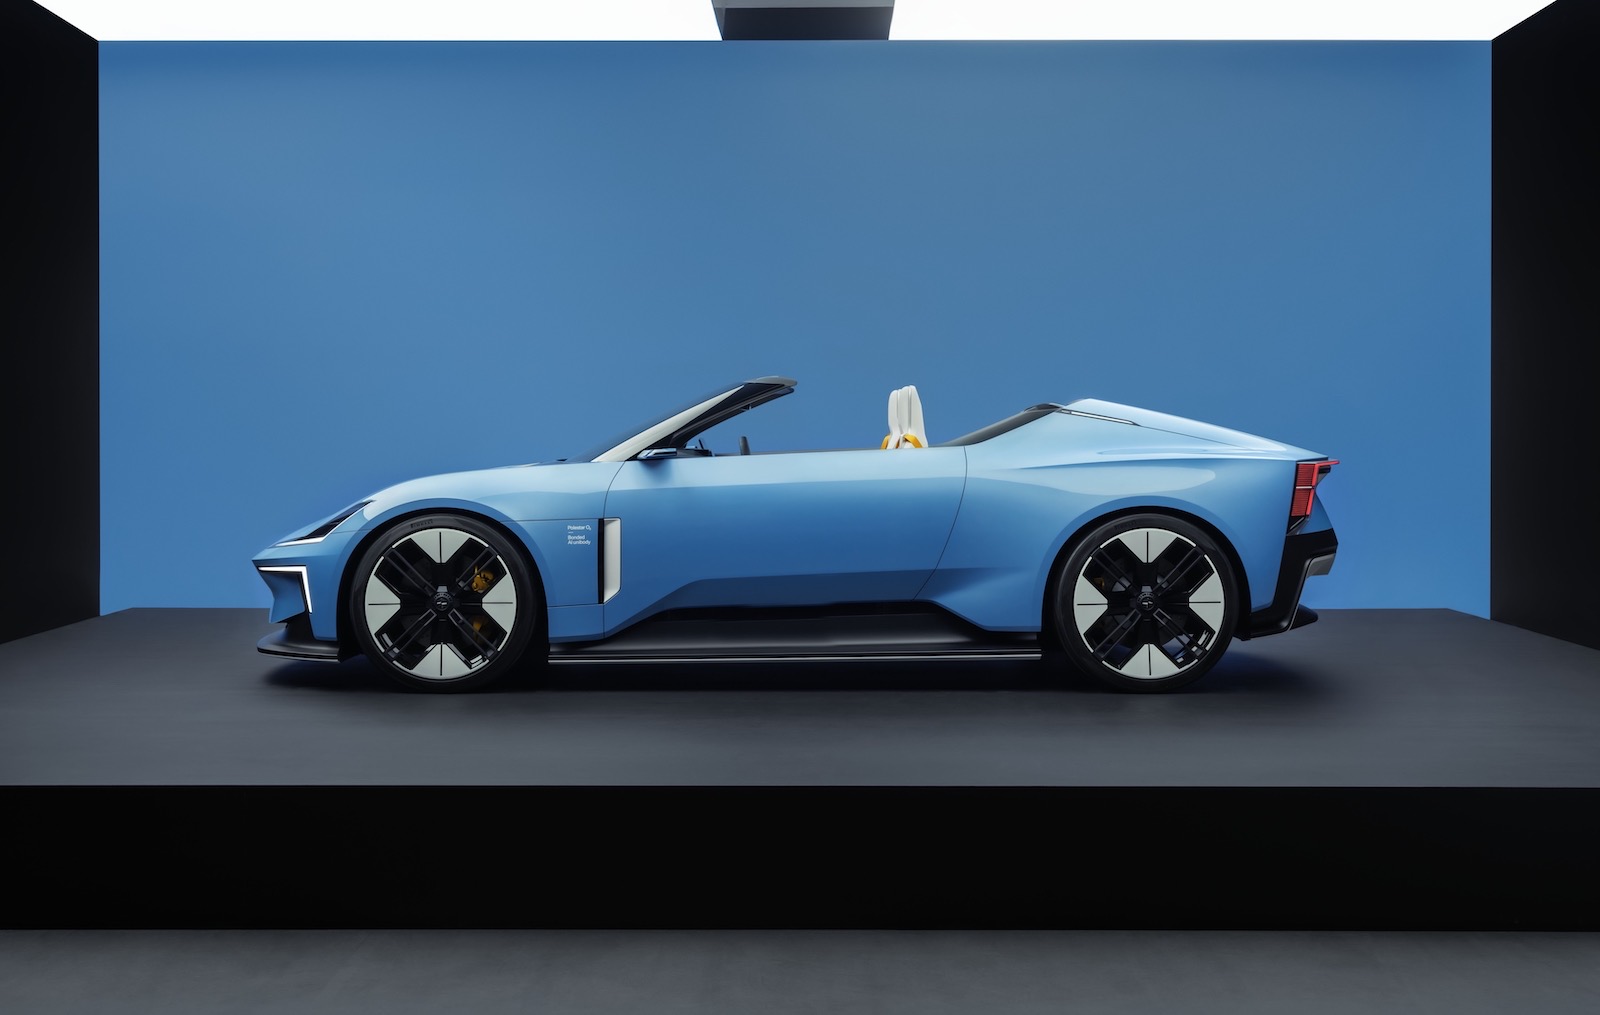 650kW Polestar O2 electric roadster confirmed for production, called the 6